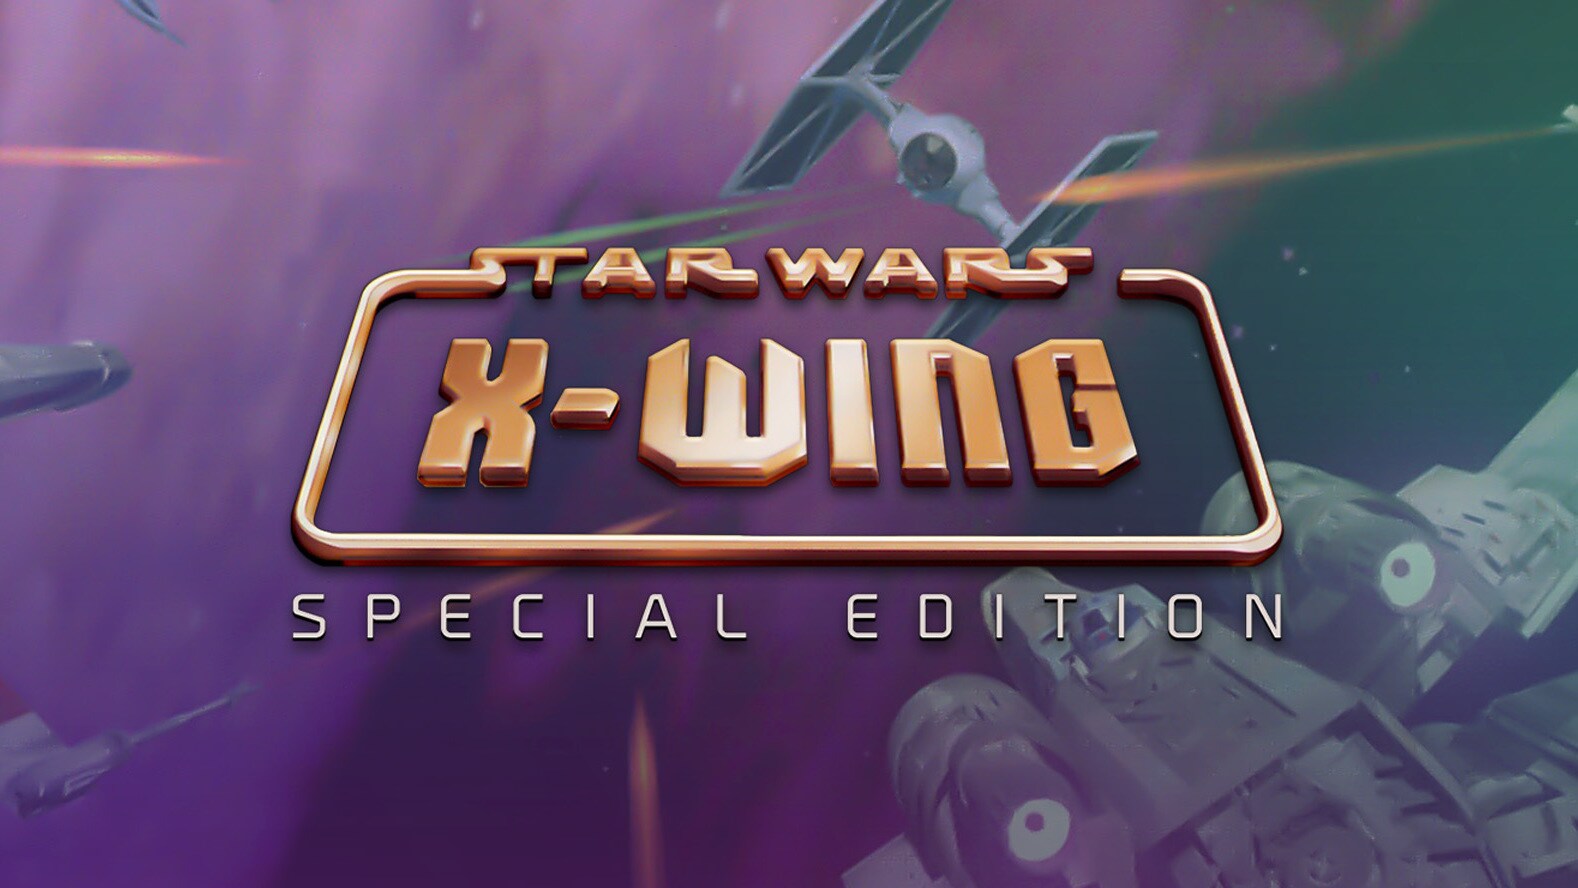 Star Wars: X-Wing Special Edition on GOG.com